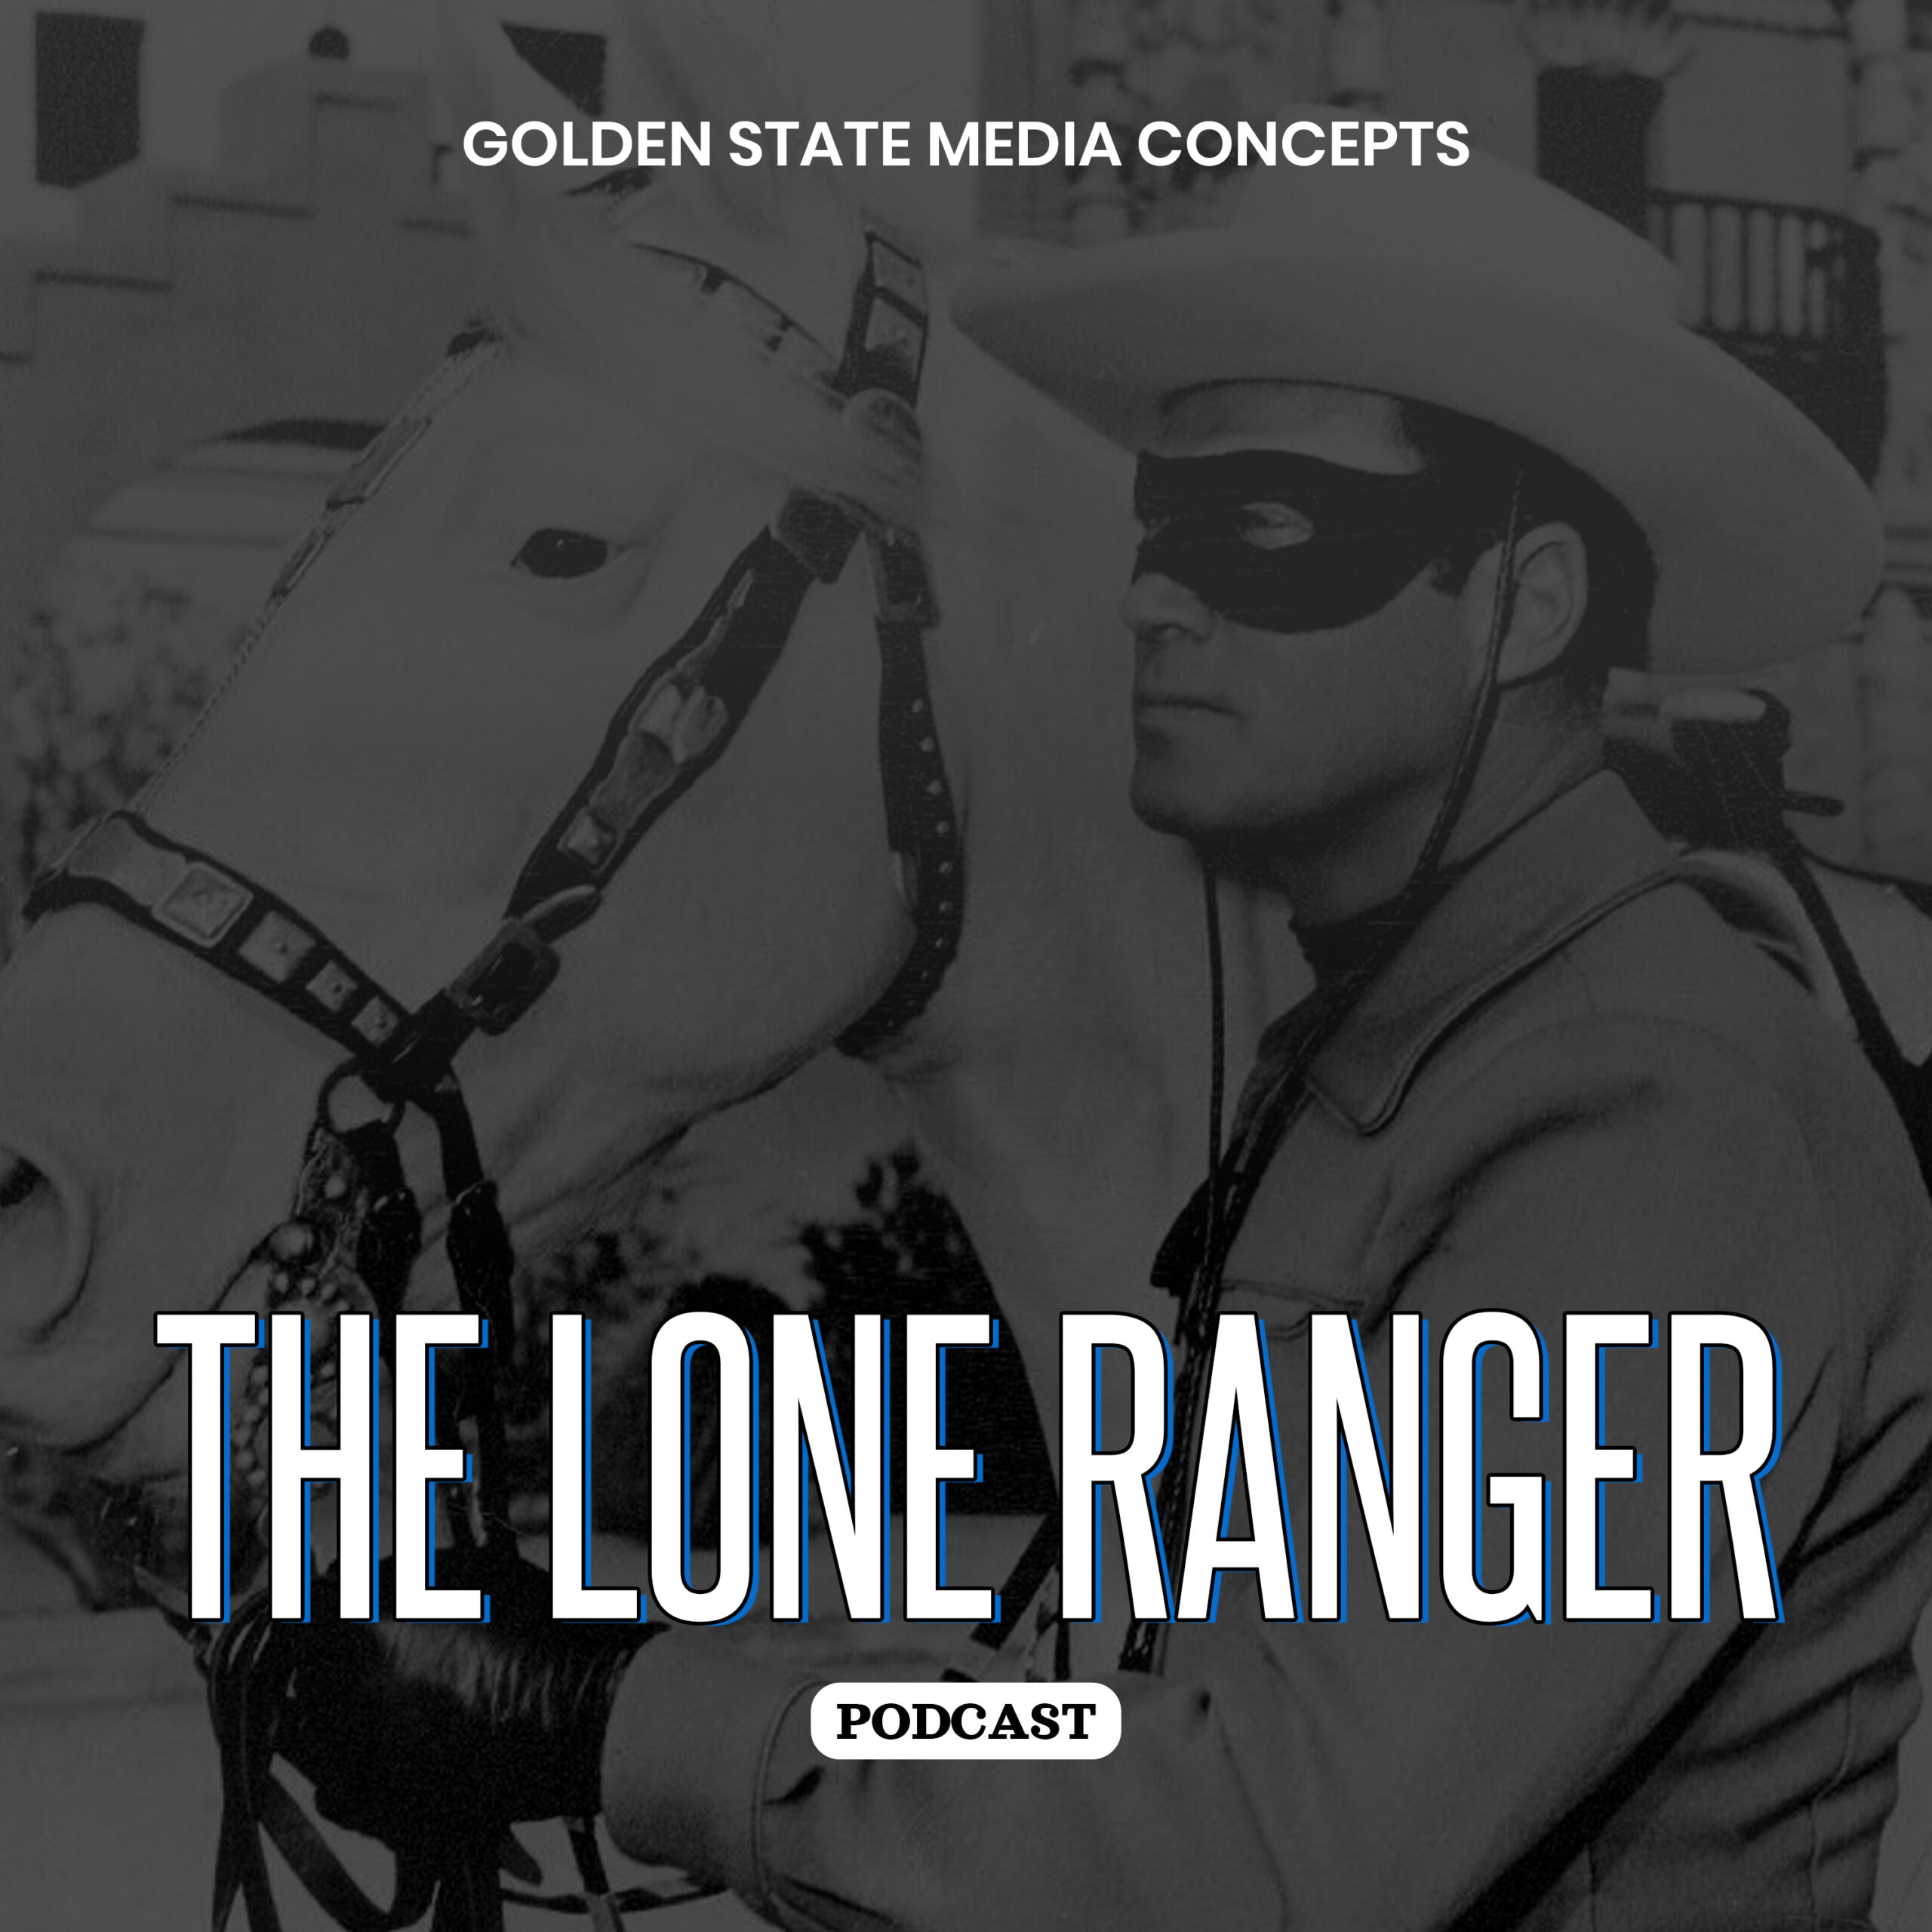 The Lone Ranger show